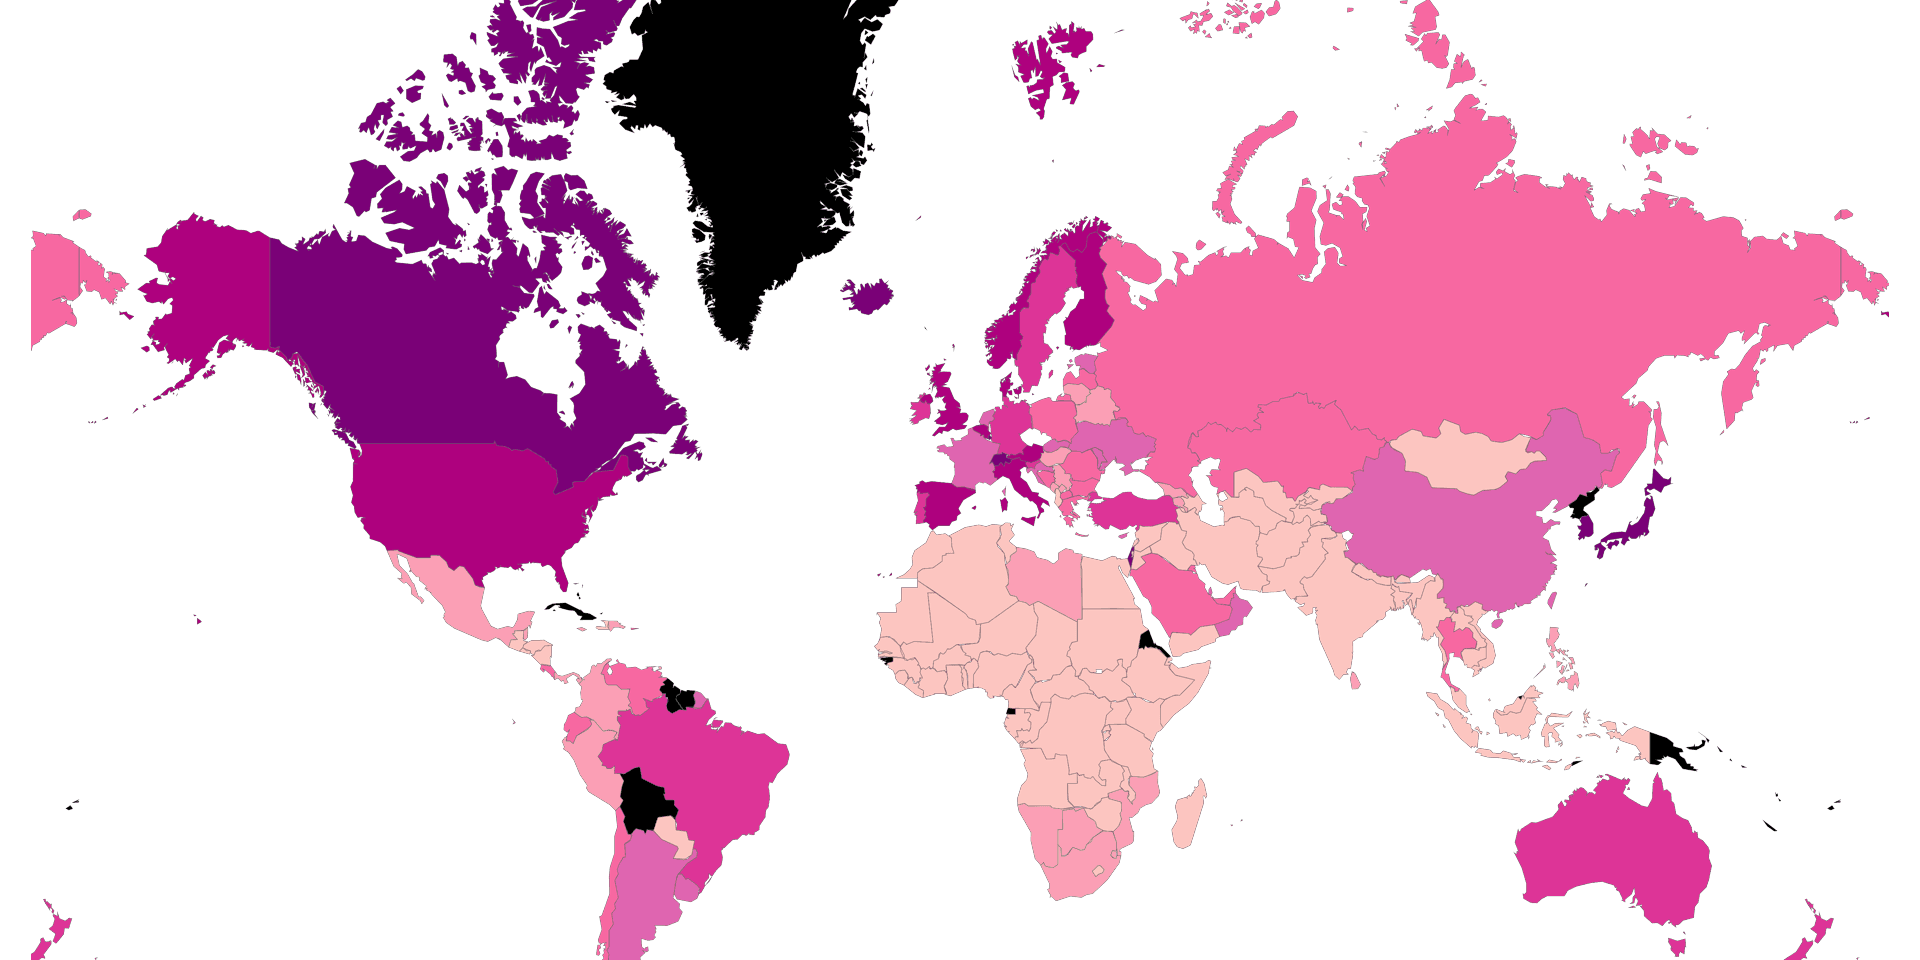 Percentage of people in each country with a credit card